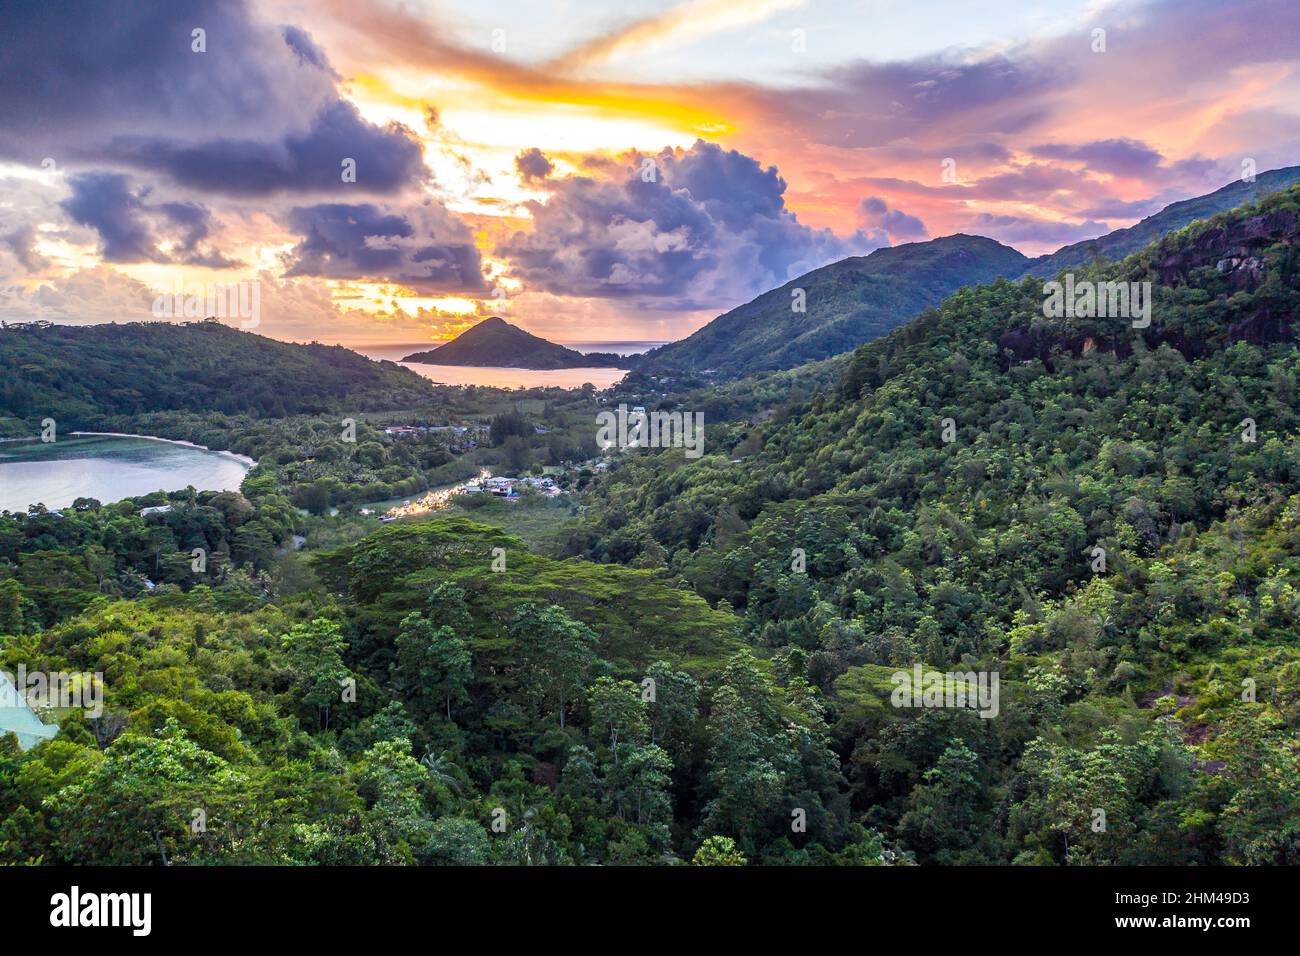 Mahe Island coast drone sunset landscape with dramatic pink sky, clouds, lush tropical forest and small islands around. Stock Photo